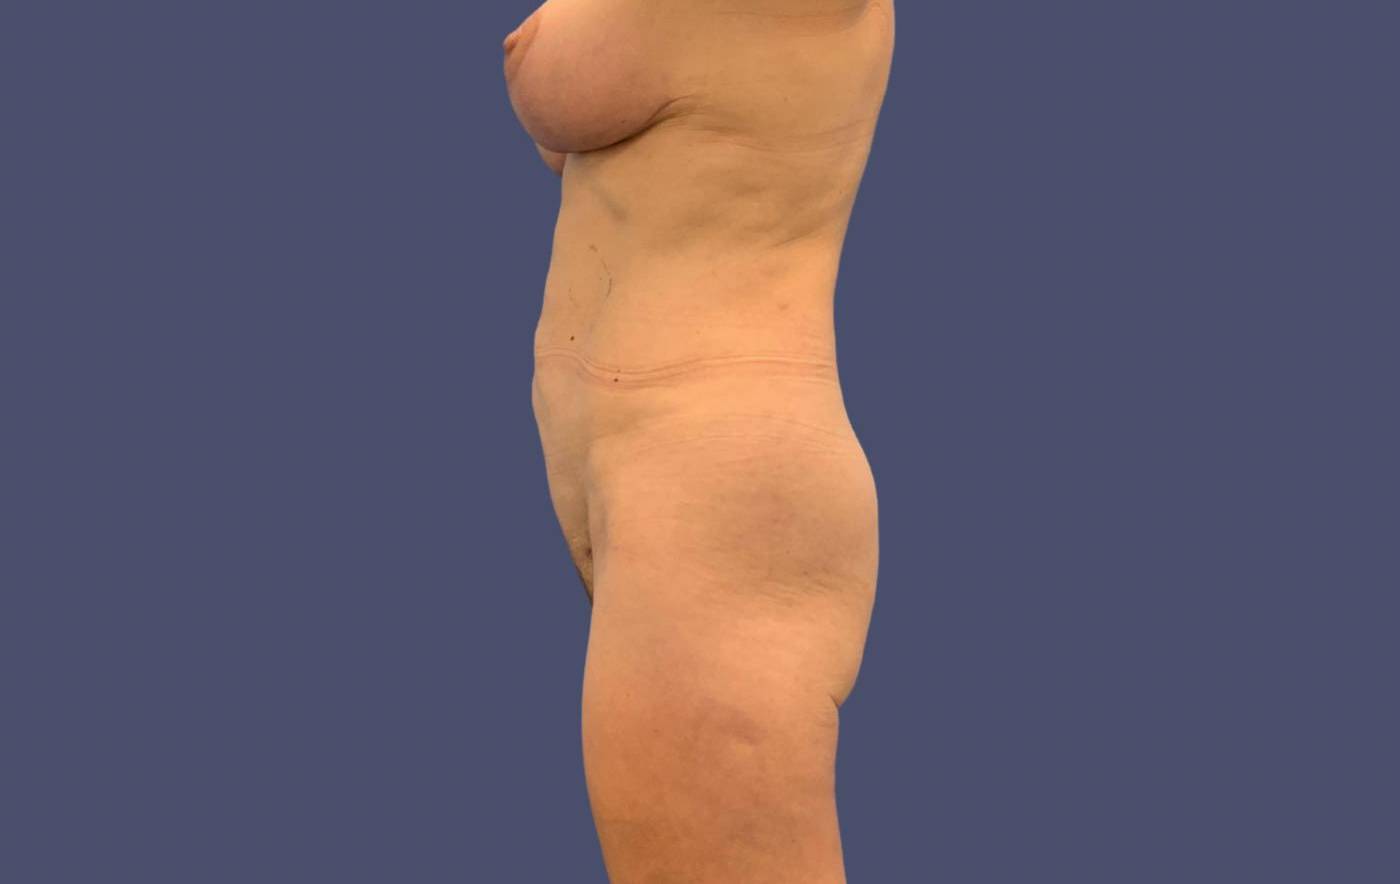 Liposuction 1 - Axilla, Abdomen, and Anterior Flanks After